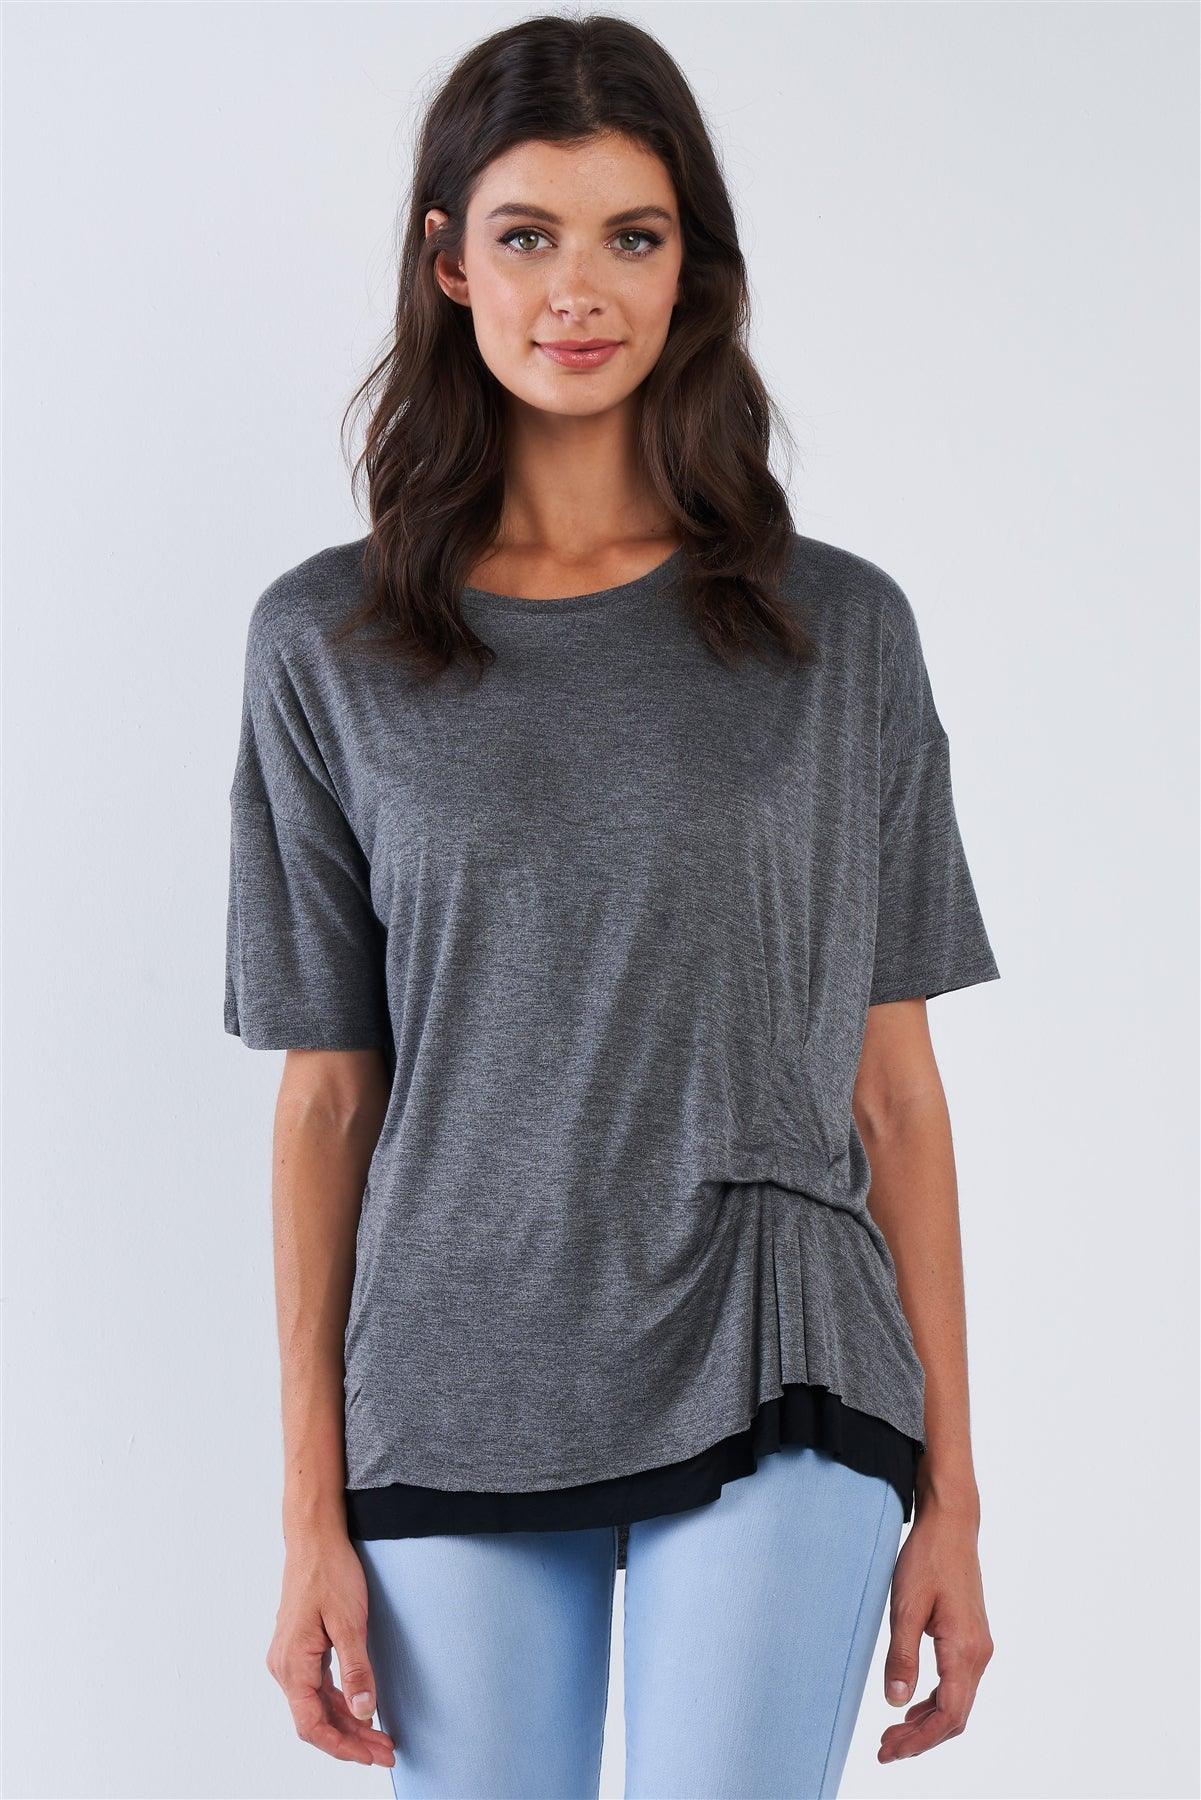 Charcoal Layered Soft Loose Fit Short Sleeve Top With One Sided Cinched Seam